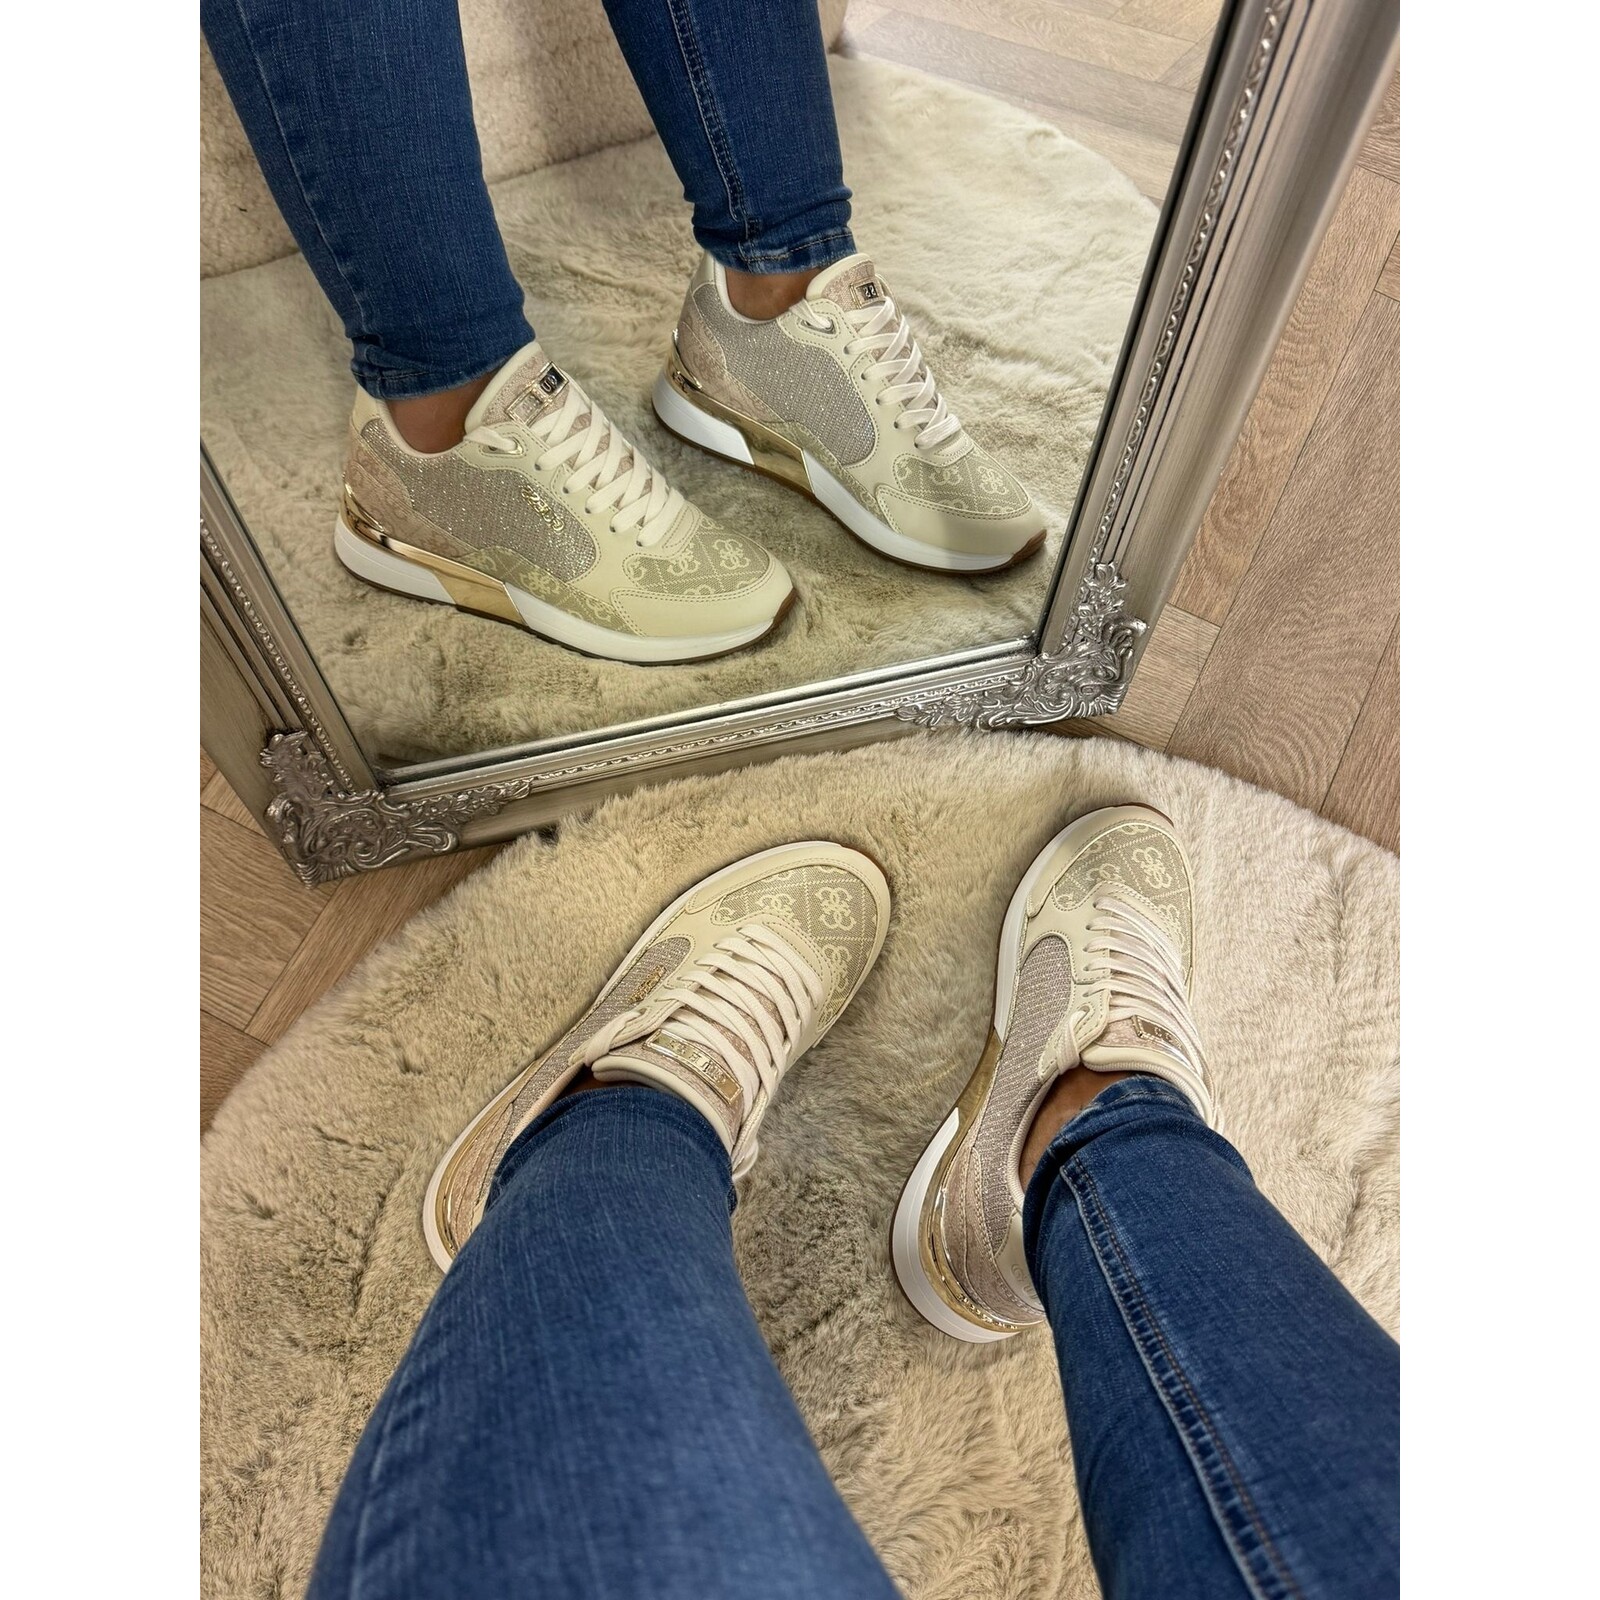 Guess Sneakers Glitter with logo"s  Cream Guess  806